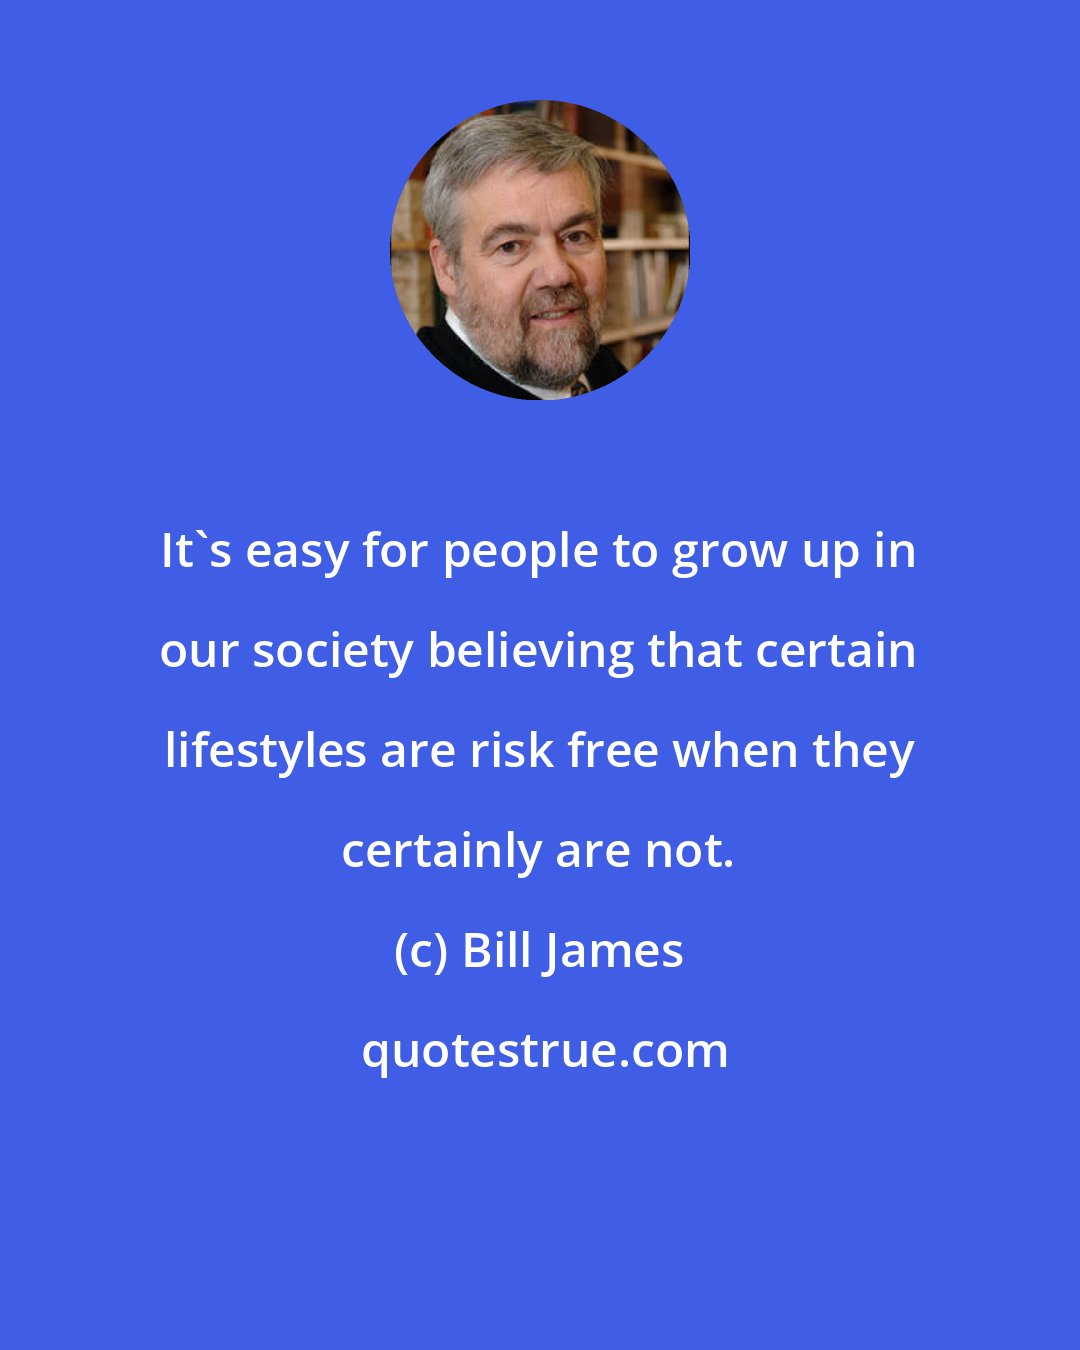 Bill James: It's easy for people to grow up in our society believing that certain lifestyles are risk free when they certainly are not.